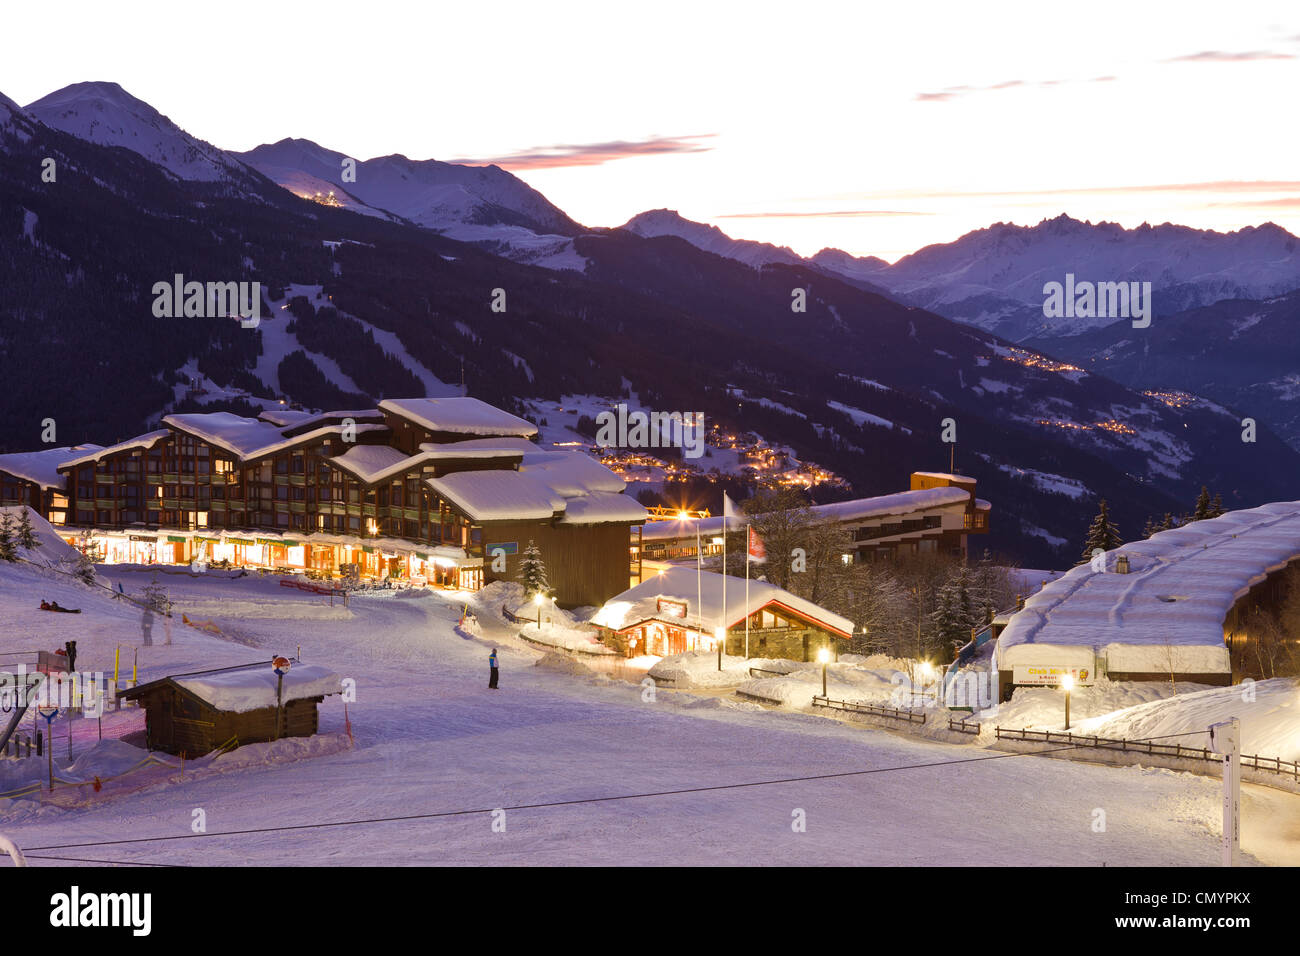 France, Savoie, Les Arcs 1800, Massif de La Vanoise, high Tarentaise valley with a view of the ski resorts of La Plagne and the Stock Photo